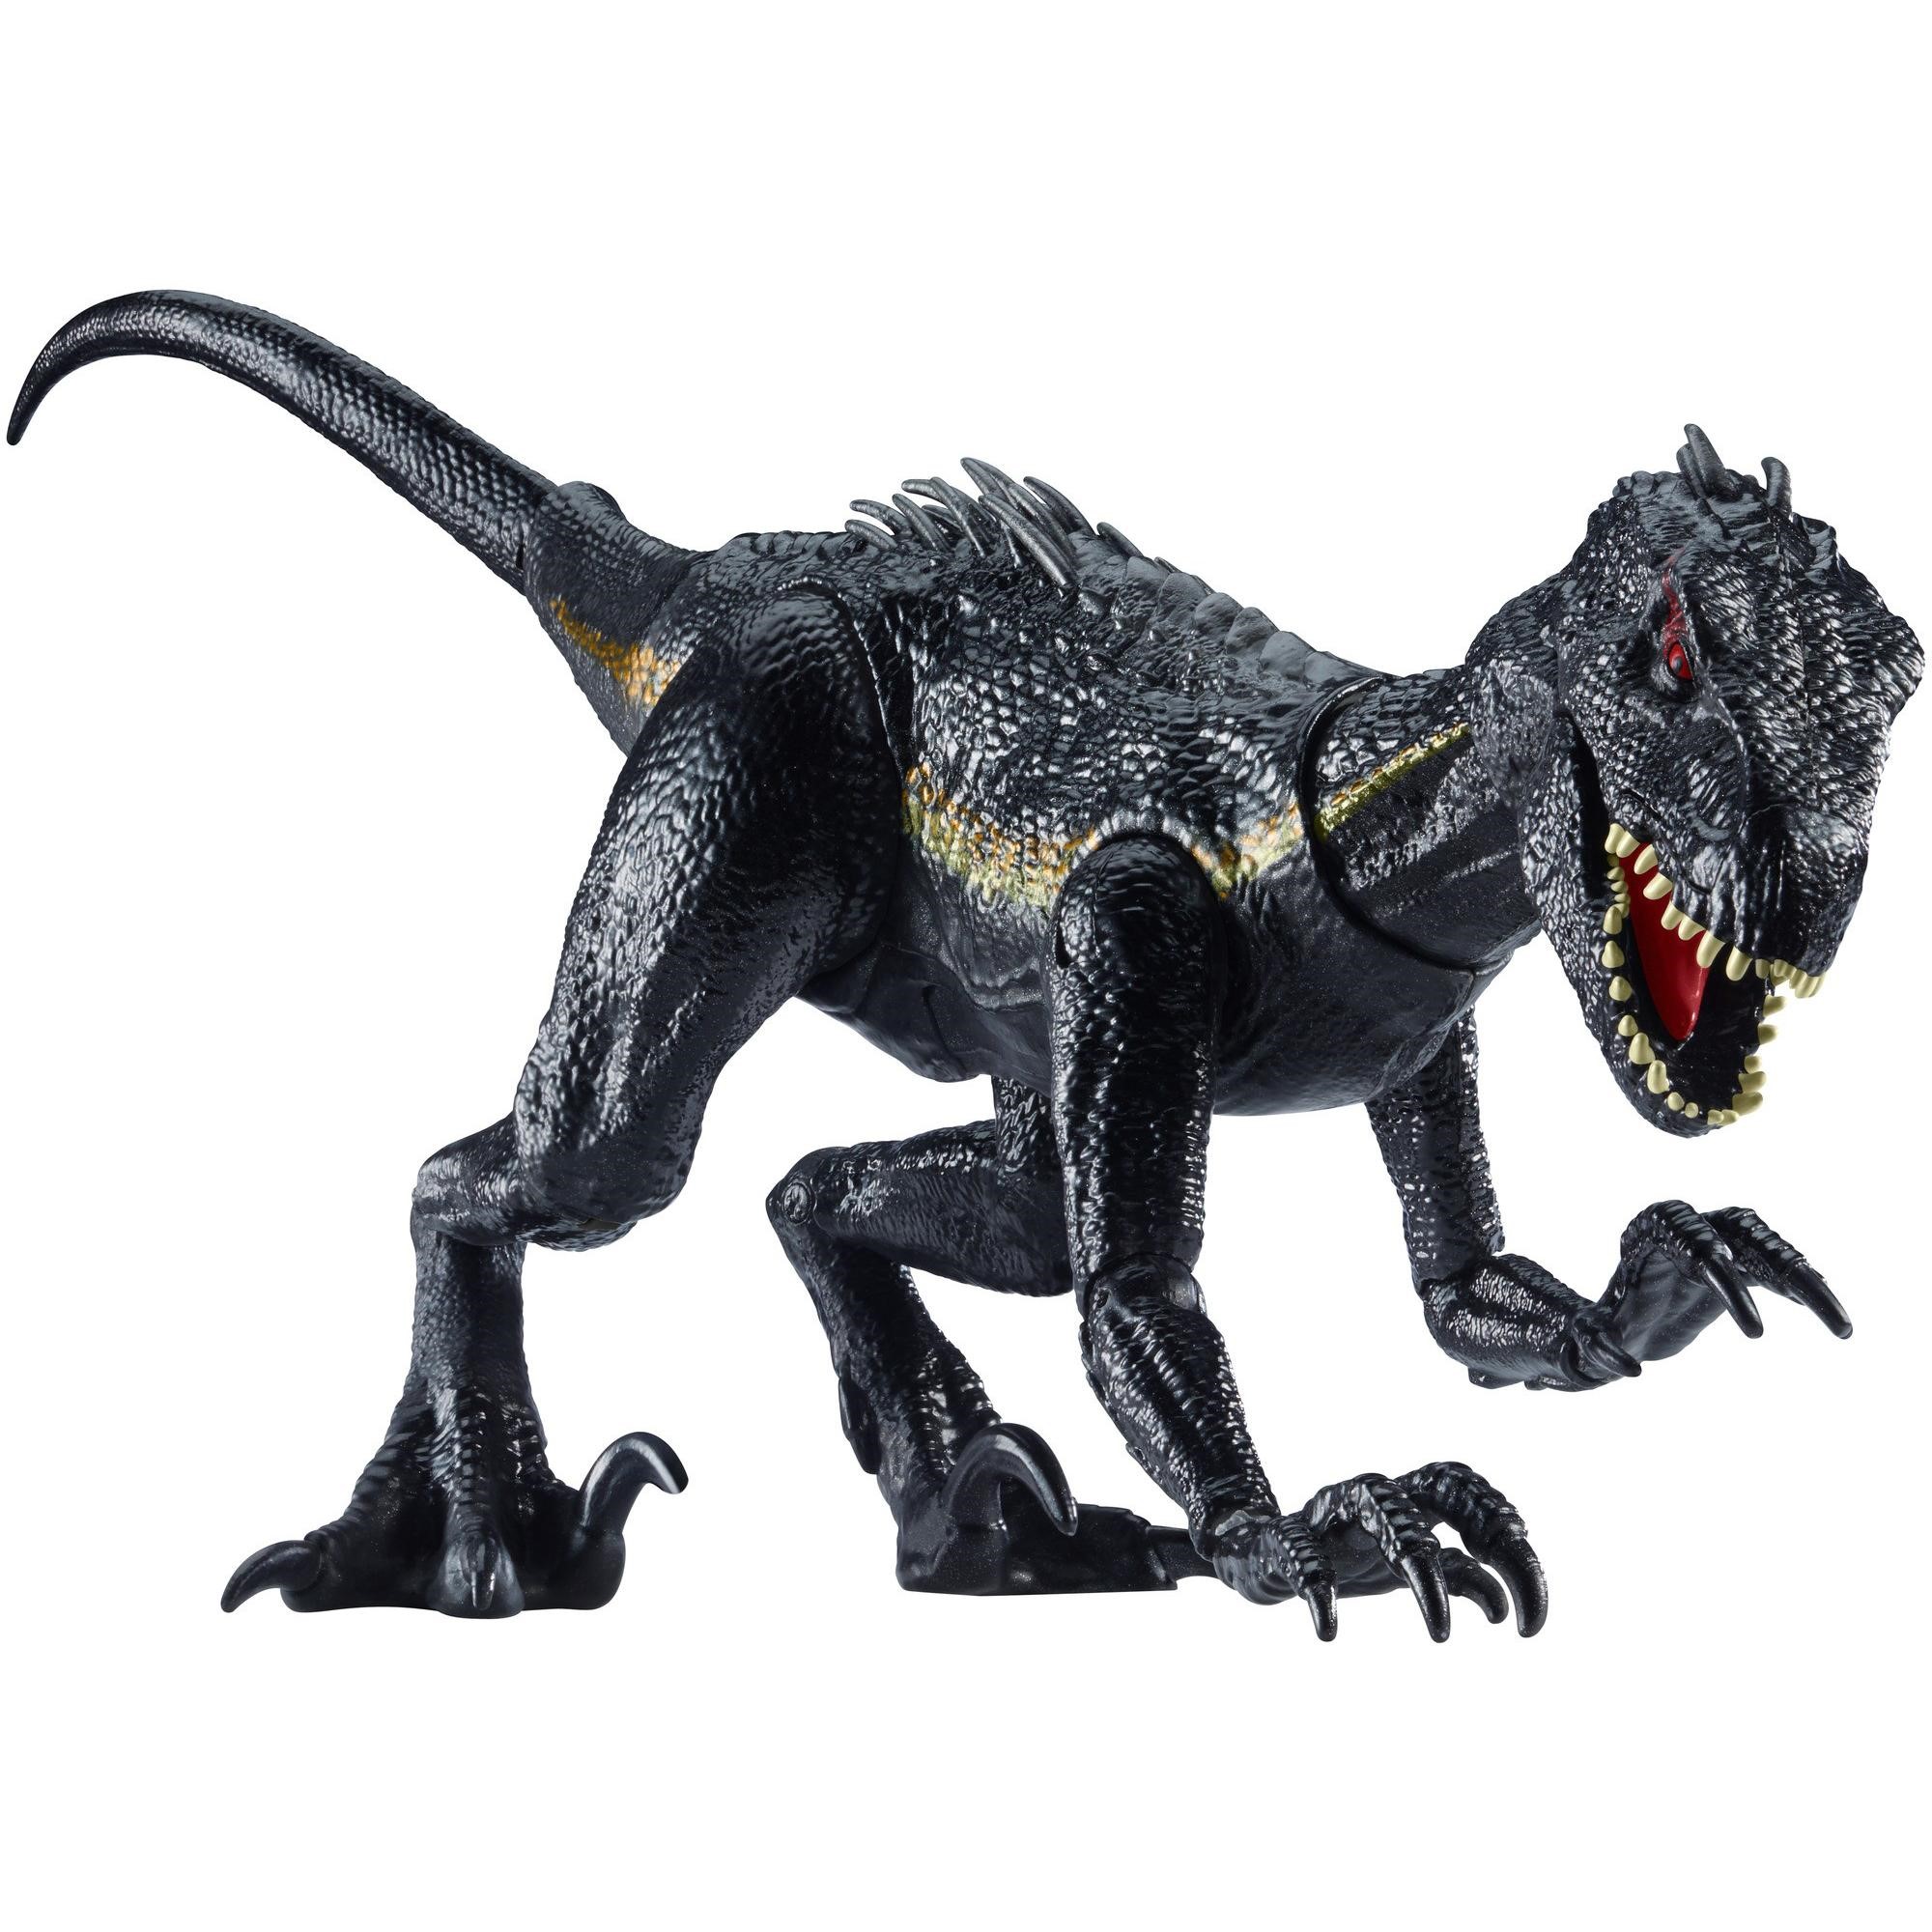 Jurassic World: Fallen Kingdom Indoraptor Dinosaur Action Figure with Movable Joints, Toy Gift ​ - image 4 of 6